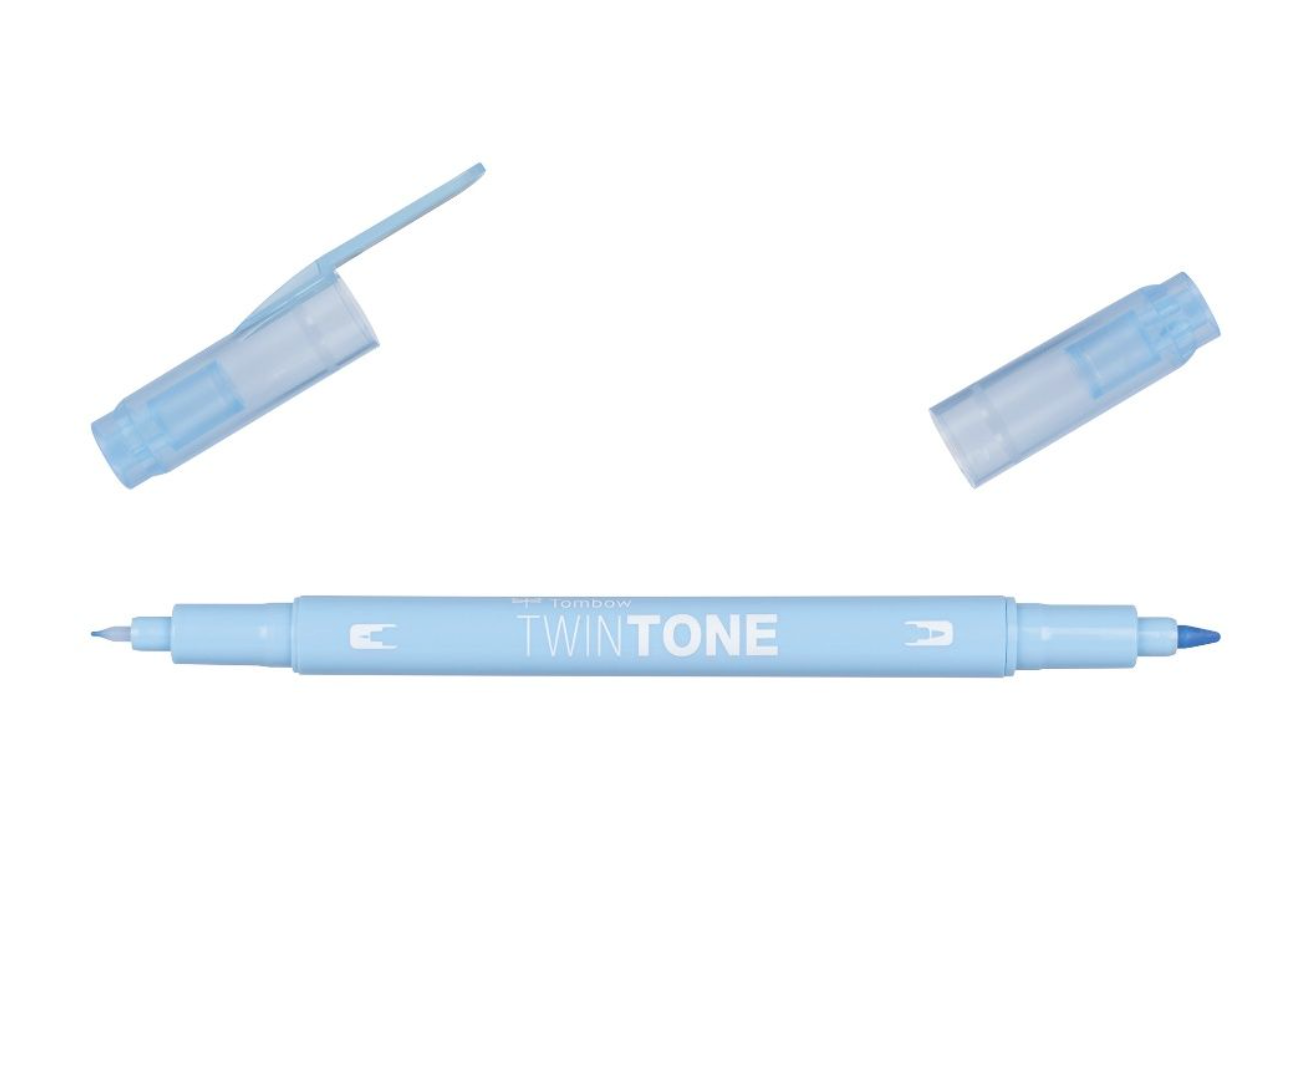 Tombow Twin Tone Dual-Tip Markers